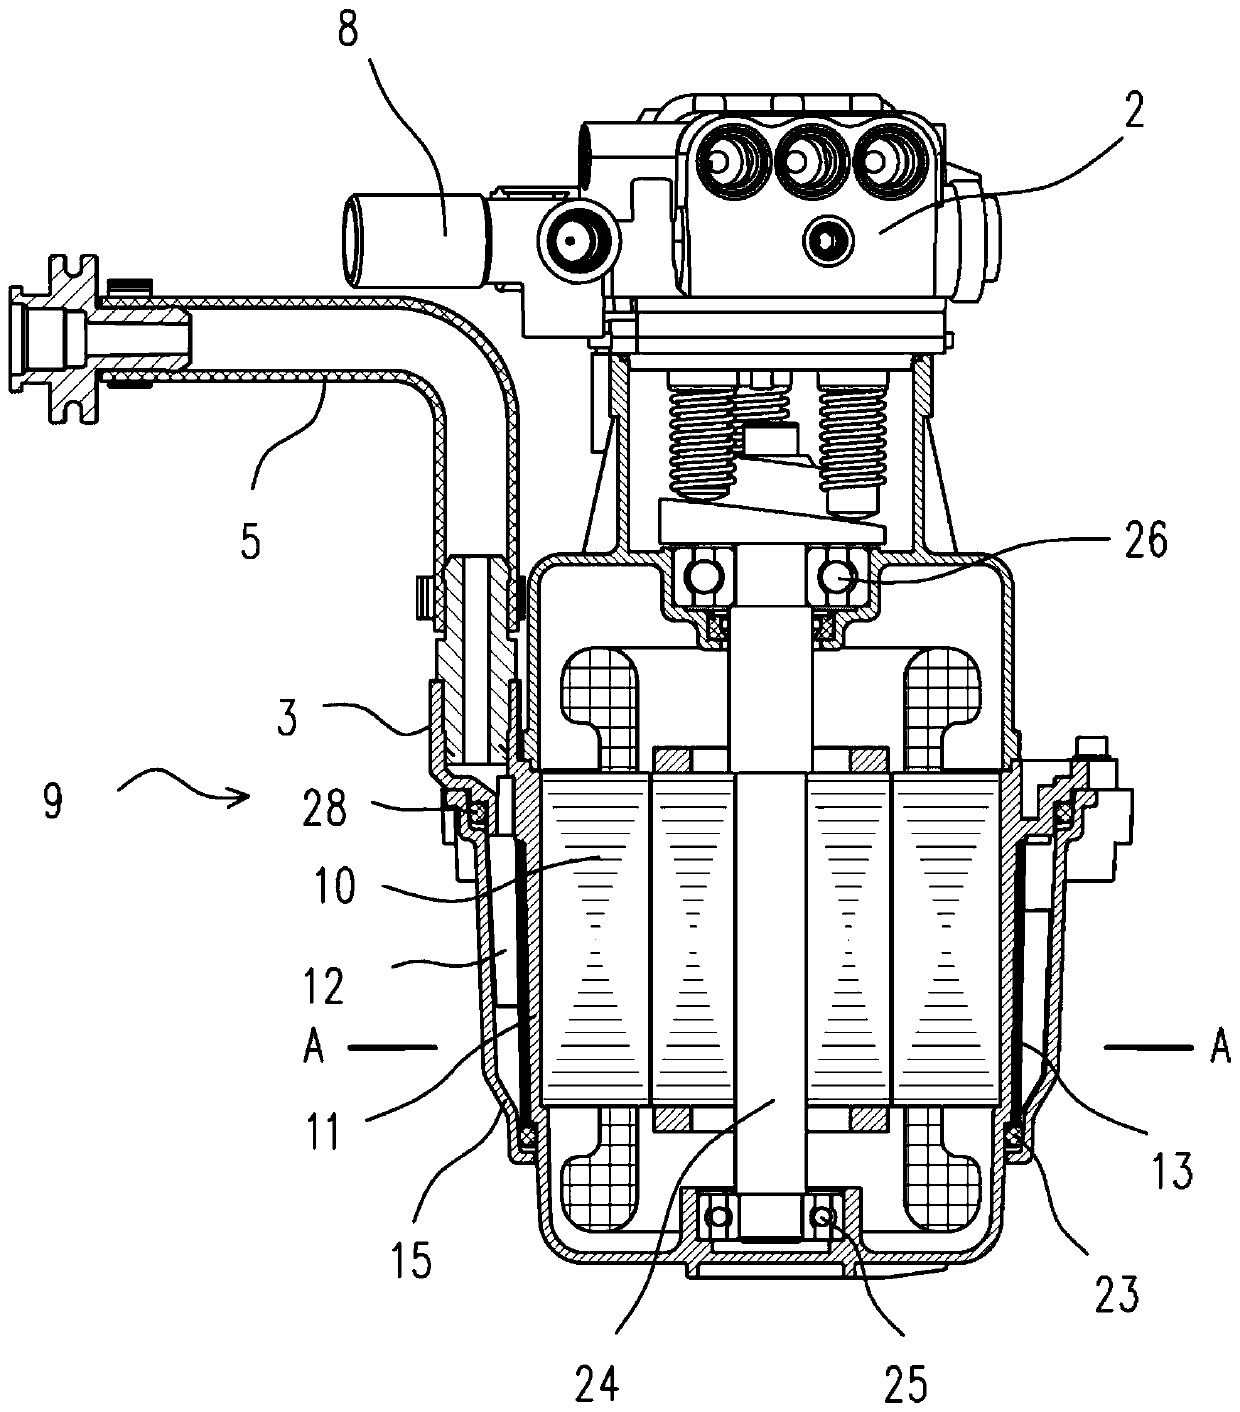 A low-temperature antifreeze water-cooled motor pump unit and a high-pressure cleaner